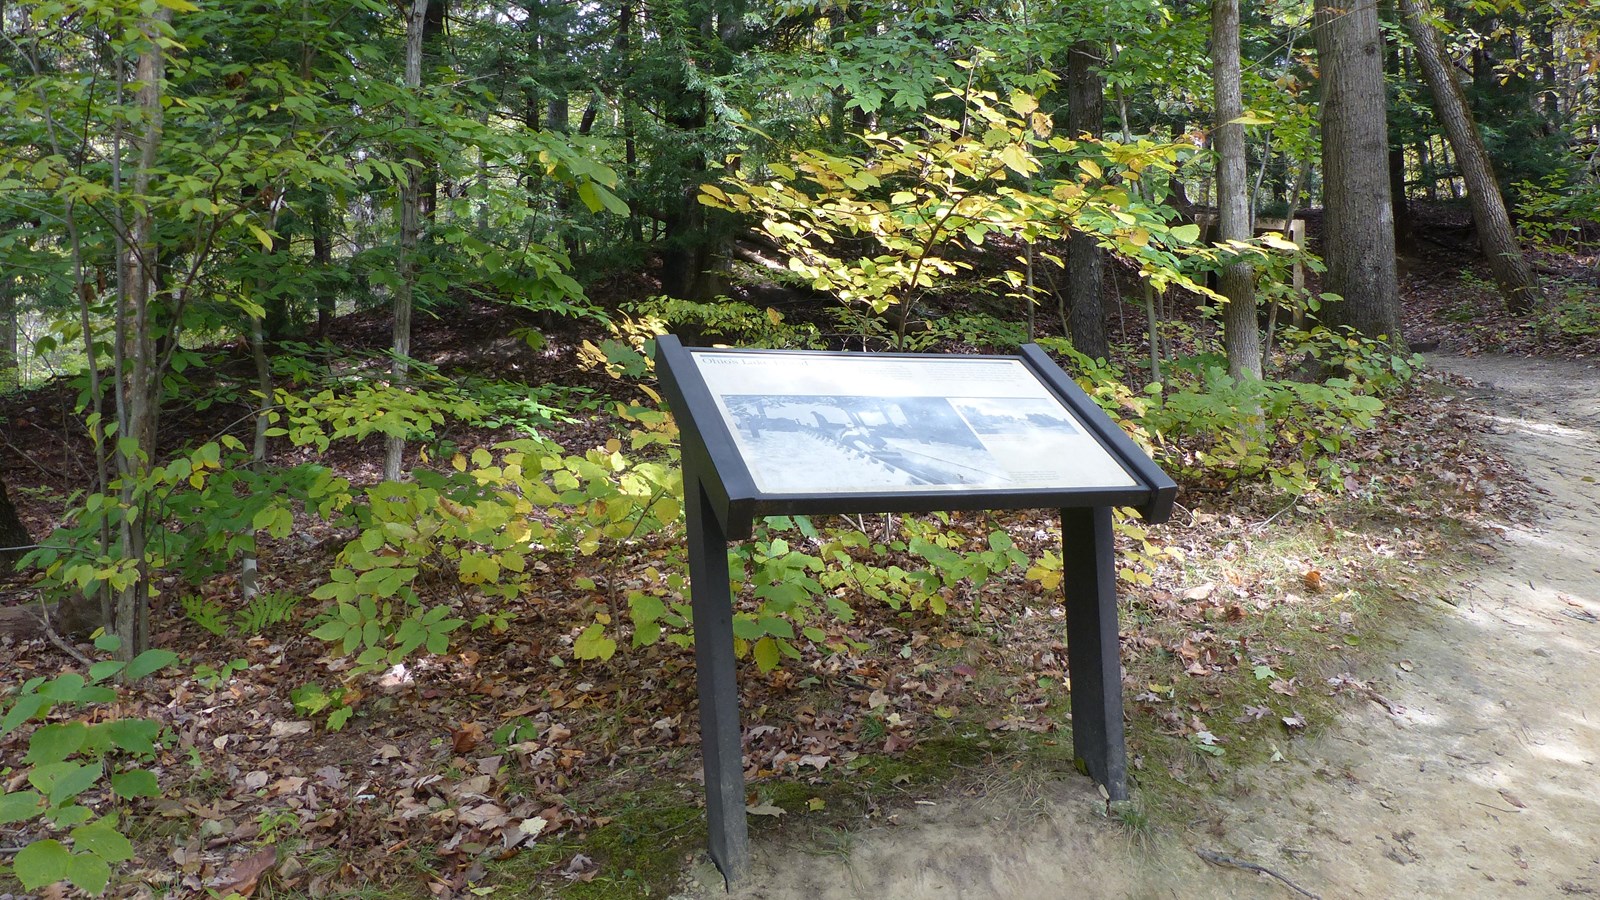 Exhibit stands beside a dirt trail, right, leading into a tunnel under a tree-covered slope.